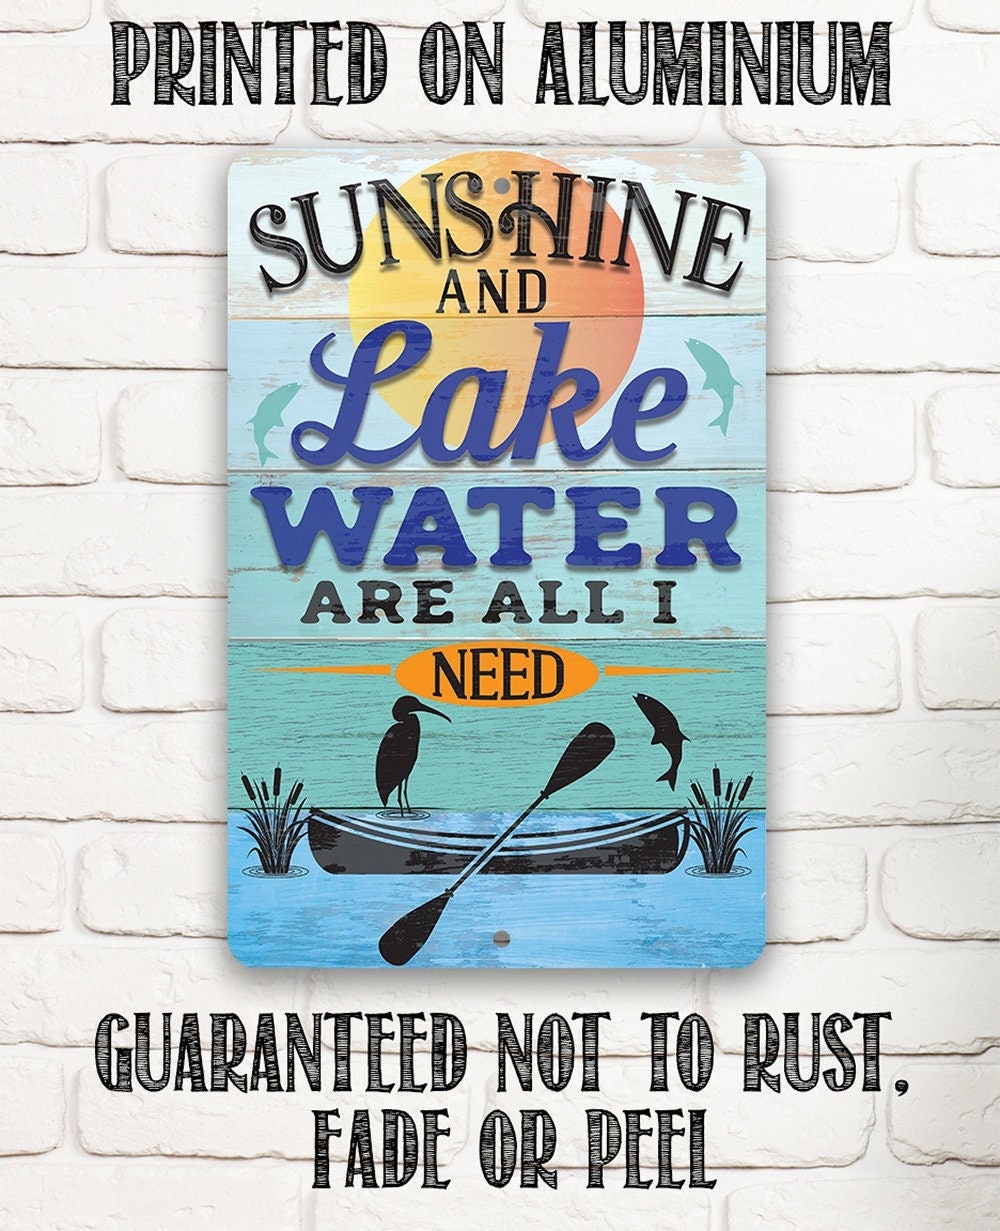 Sunshine and Lake Water Are All I Need - Metal Sign Metal Sign Lone Star Art 